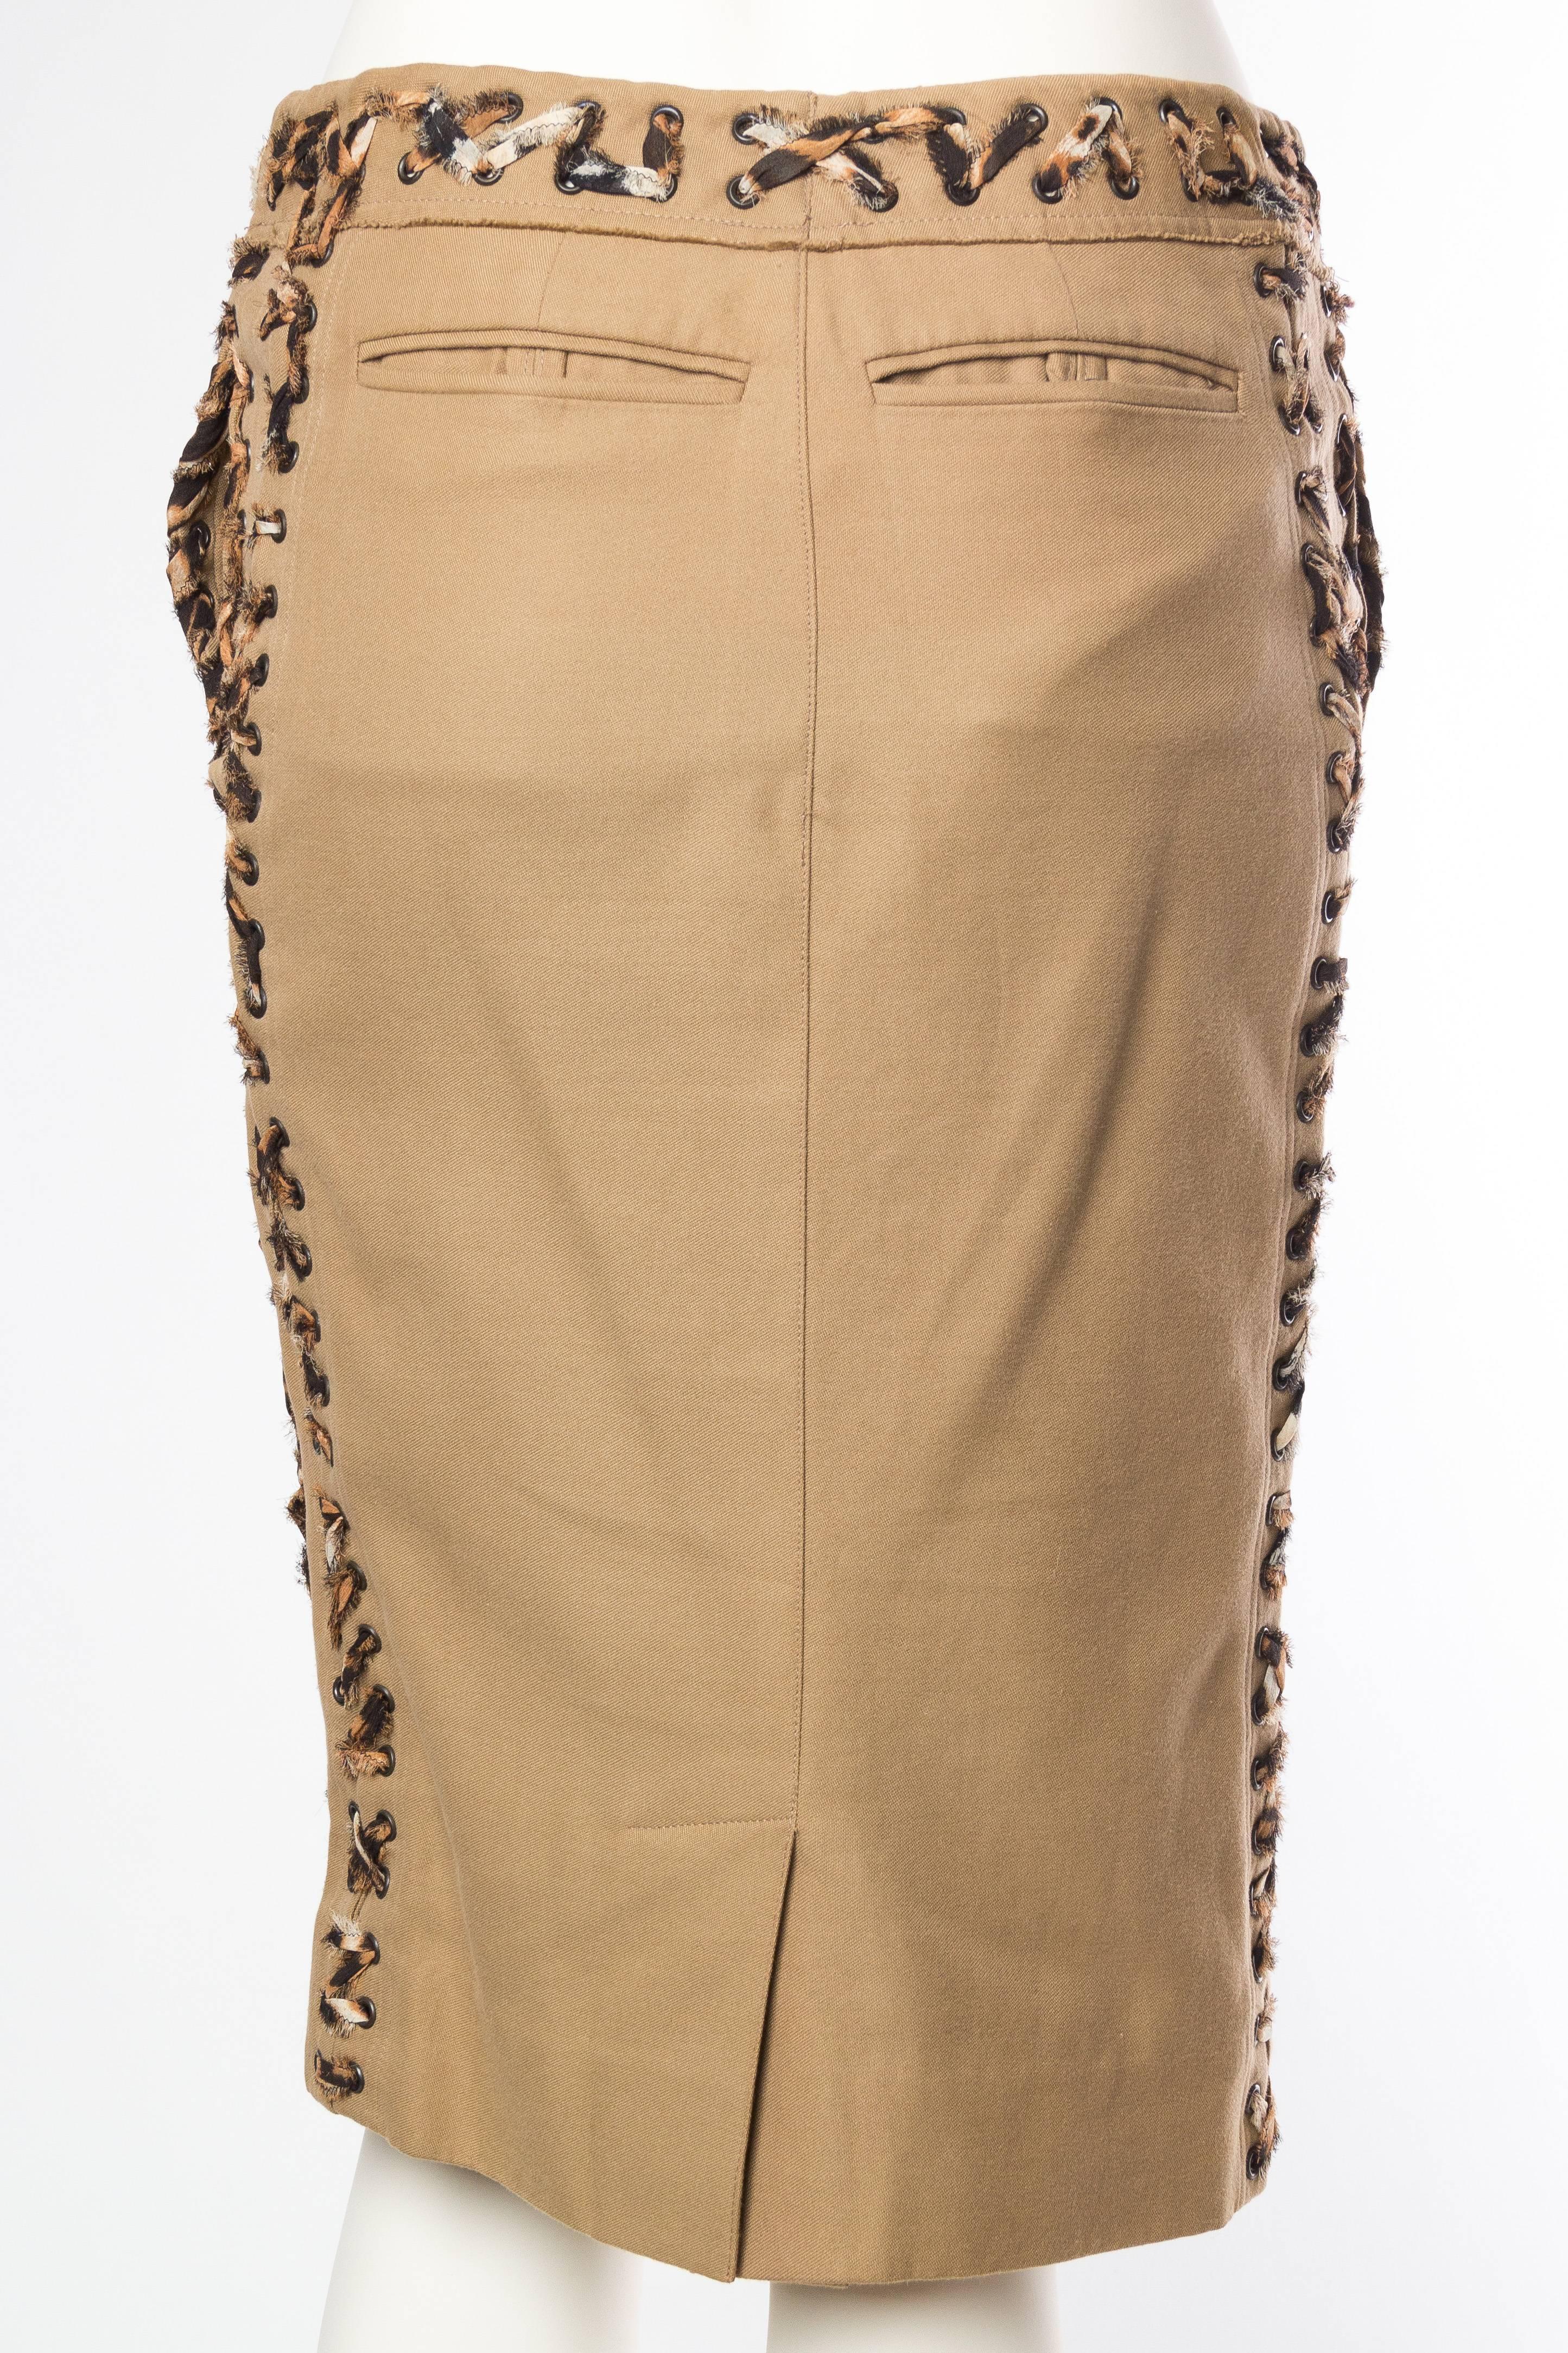 Tom Ford Yves Saint Laurent Safari Skirt In Excellent Condition In New York, NY